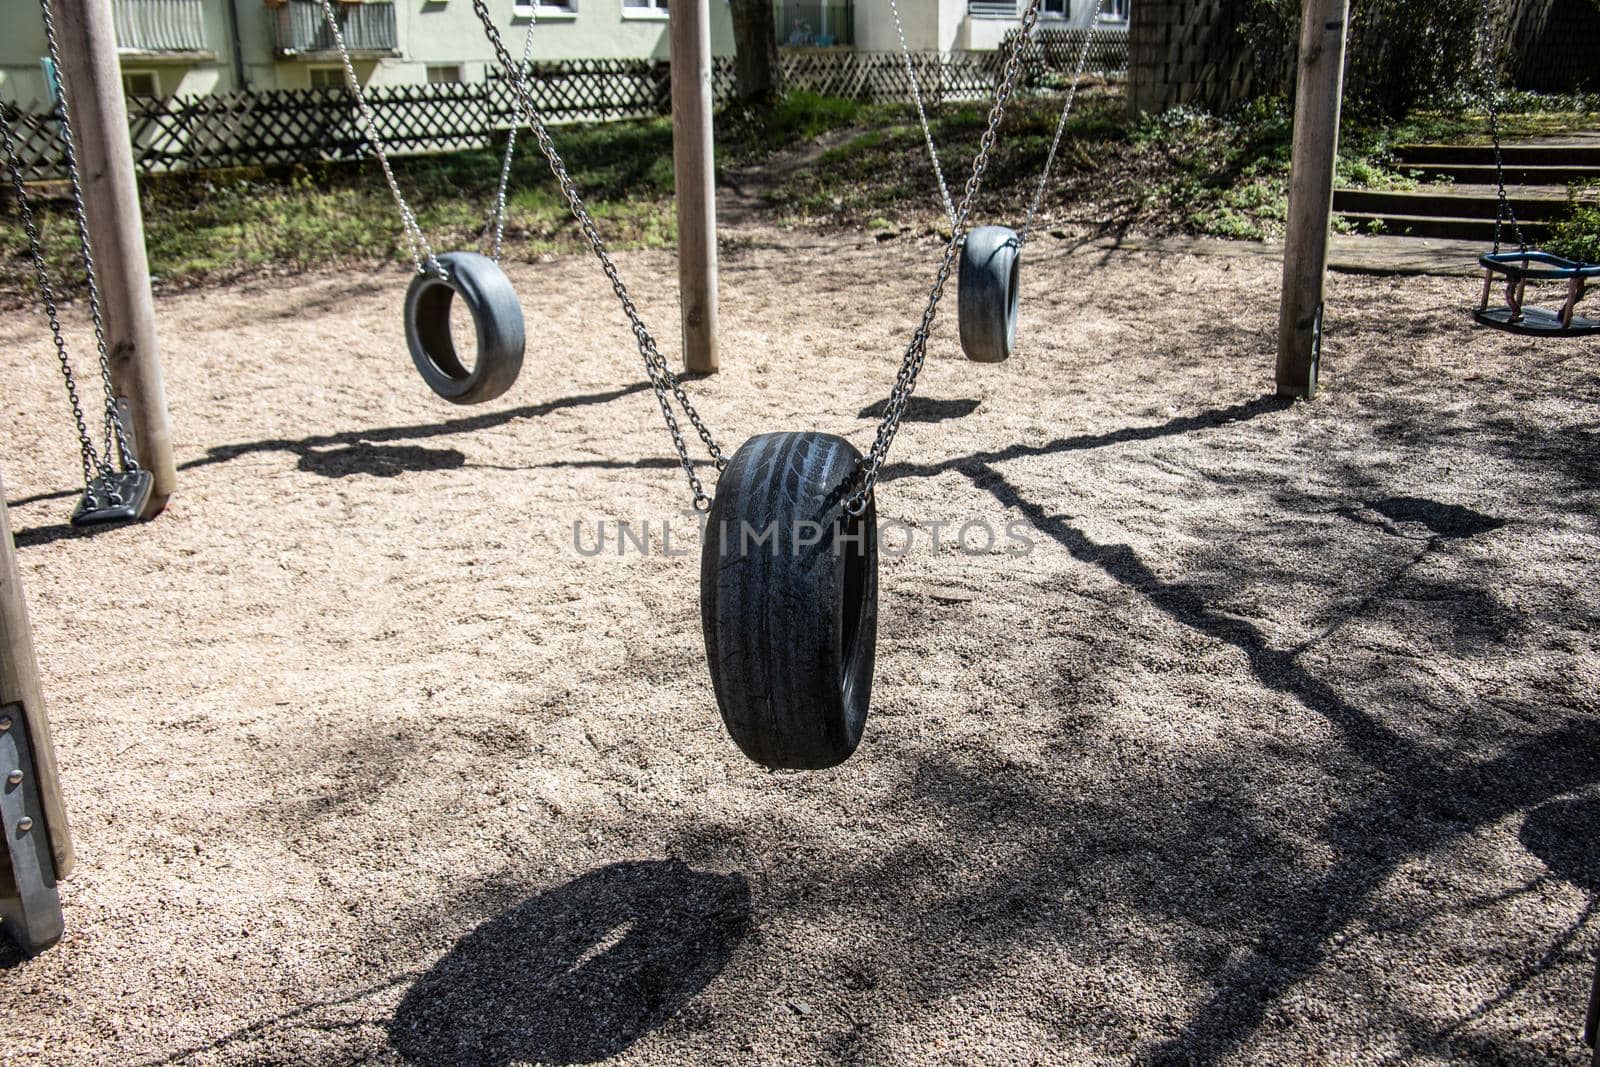 Playground in the sandpit with rubber tires as a swing